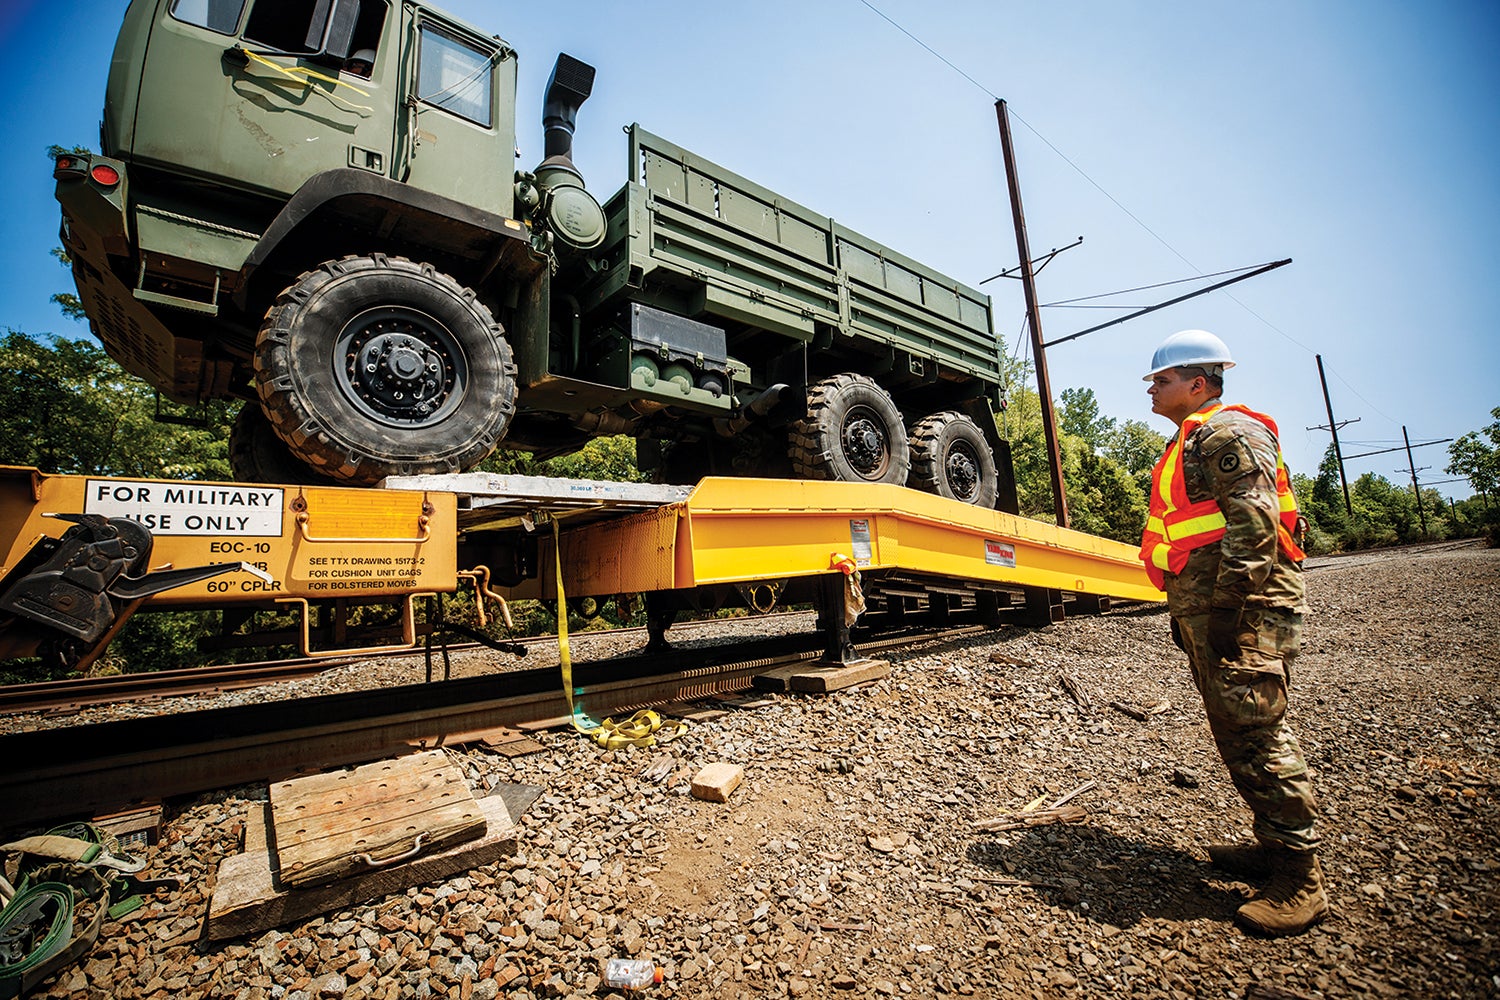 Below: A soldier with the New Jersey Army National Guard’s 44th Infantry Brigade Combat Team directs a vehicle onto a rail car in Morrisville, Pennsylvania. (Credit: Army National Guard/Spc. Michael Schwenk)